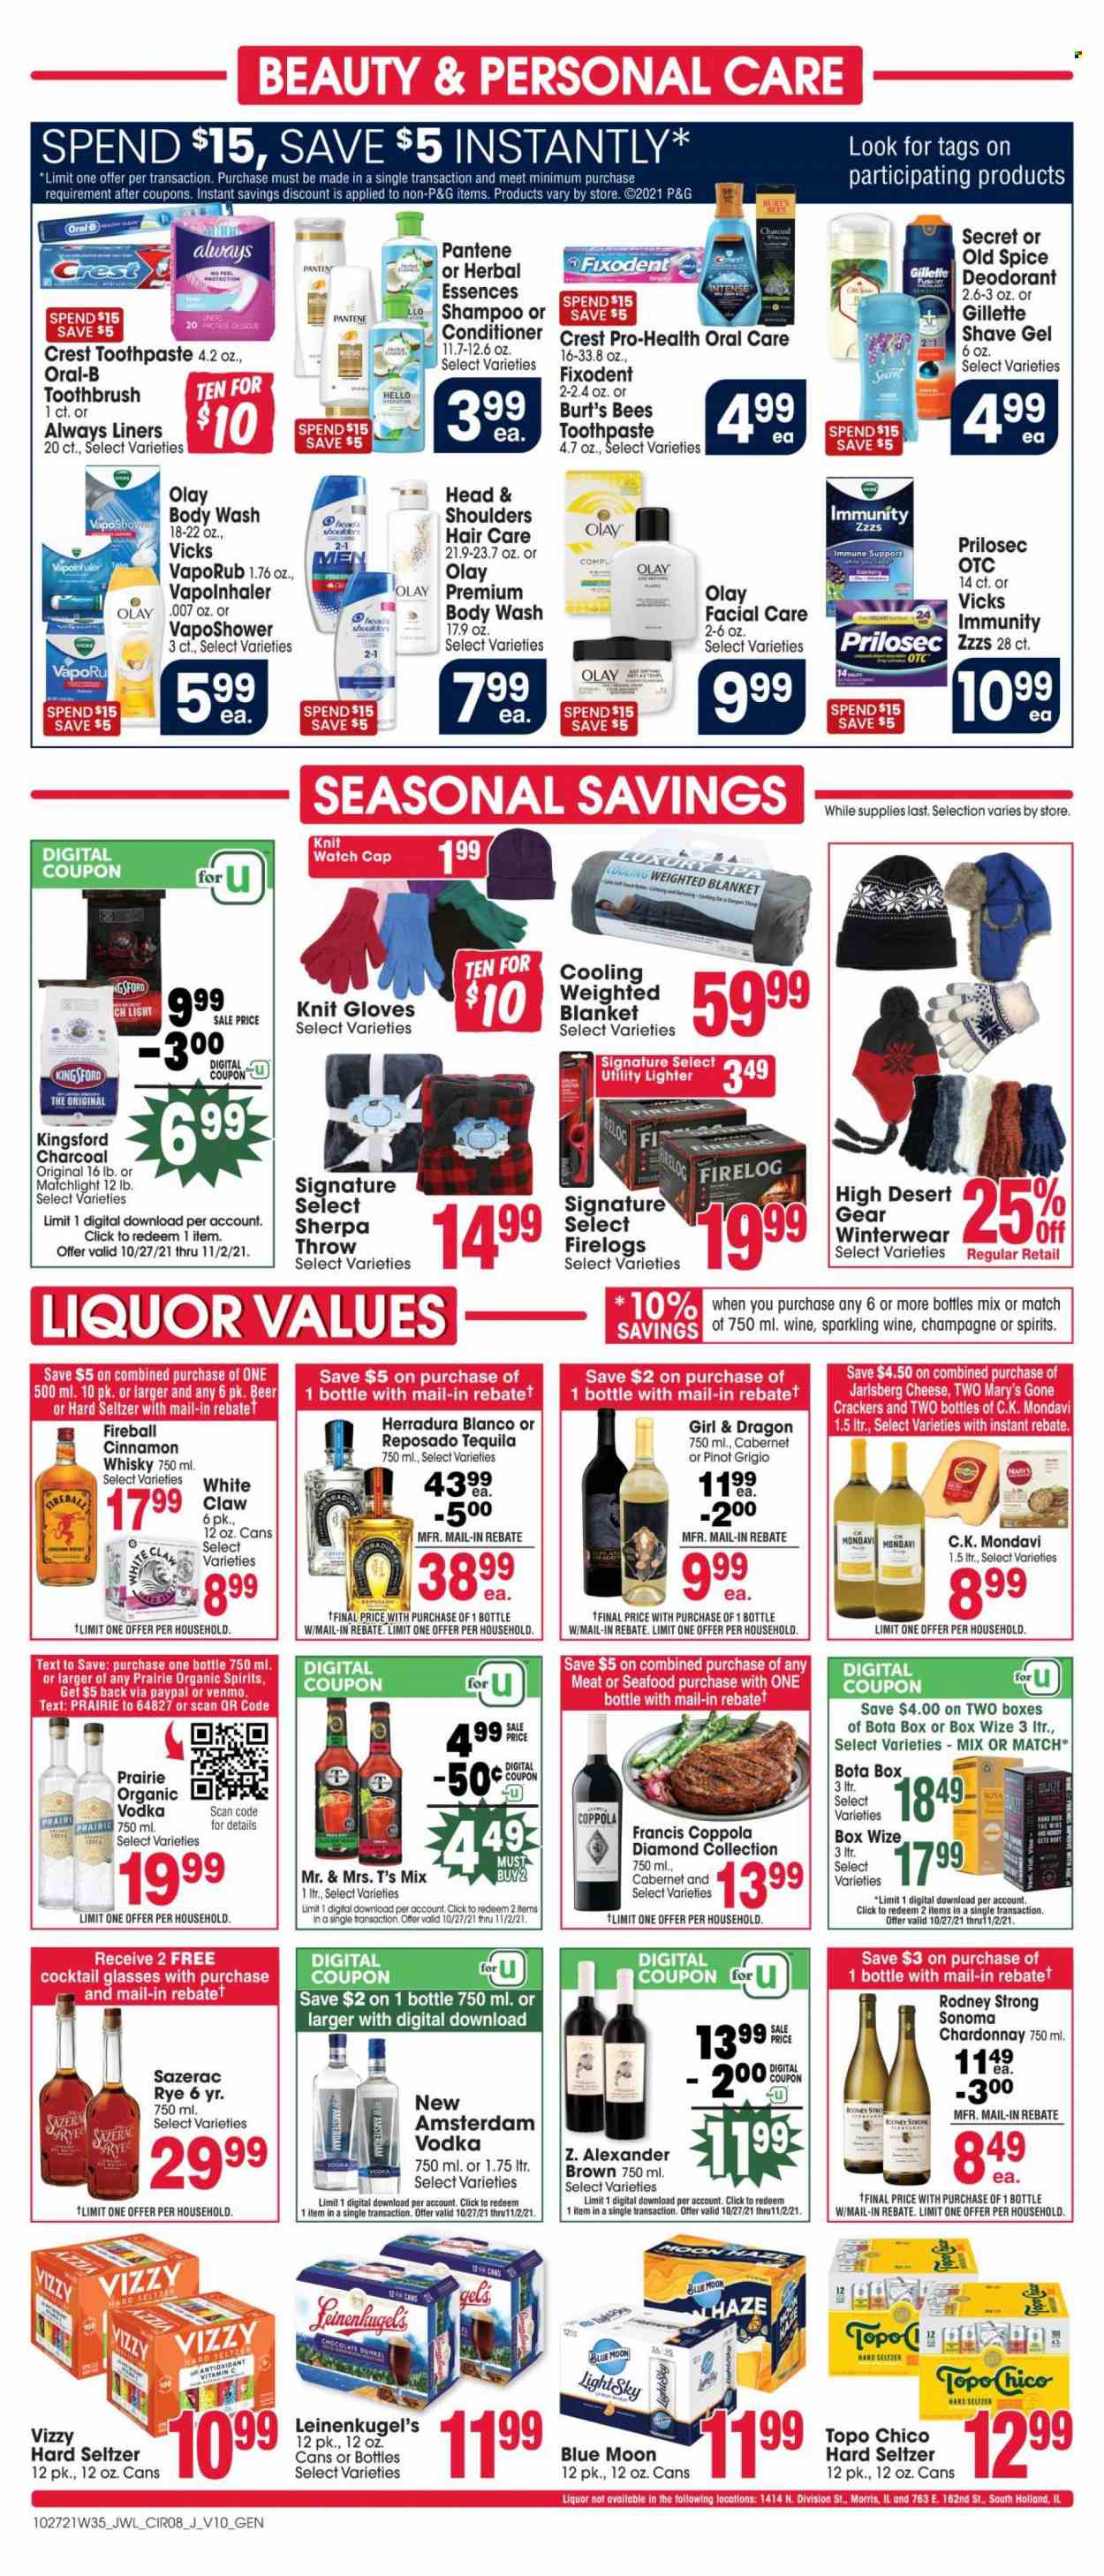 thumbnail - Jewel Osco Flyer - 10/27/2021 - 11/02/2021 - Sales products - seafood, cheese, chocolate, crackers, spice, Cabernet Sauvignon, sparkling wine, white wine, Chardonnay, wine, Pinot Grigio, tequila, vodka, Hard Seltzer, cinnamon whisky, whisky, beer, Always liners, body wash, shampoo, Old Spice, toothbrush, Oral-B, toothpaste, Fixodent, Crest, Olay, conditioner, Head & Shoulders, Pantene, Herbal Essences, anti-perspirant, deodorant, Gillette, shave gel, Vicks, gloves, blanket, charcoal, vitamin c, VapoRub, Leinenkugel's, Blue Moon. Page 8.